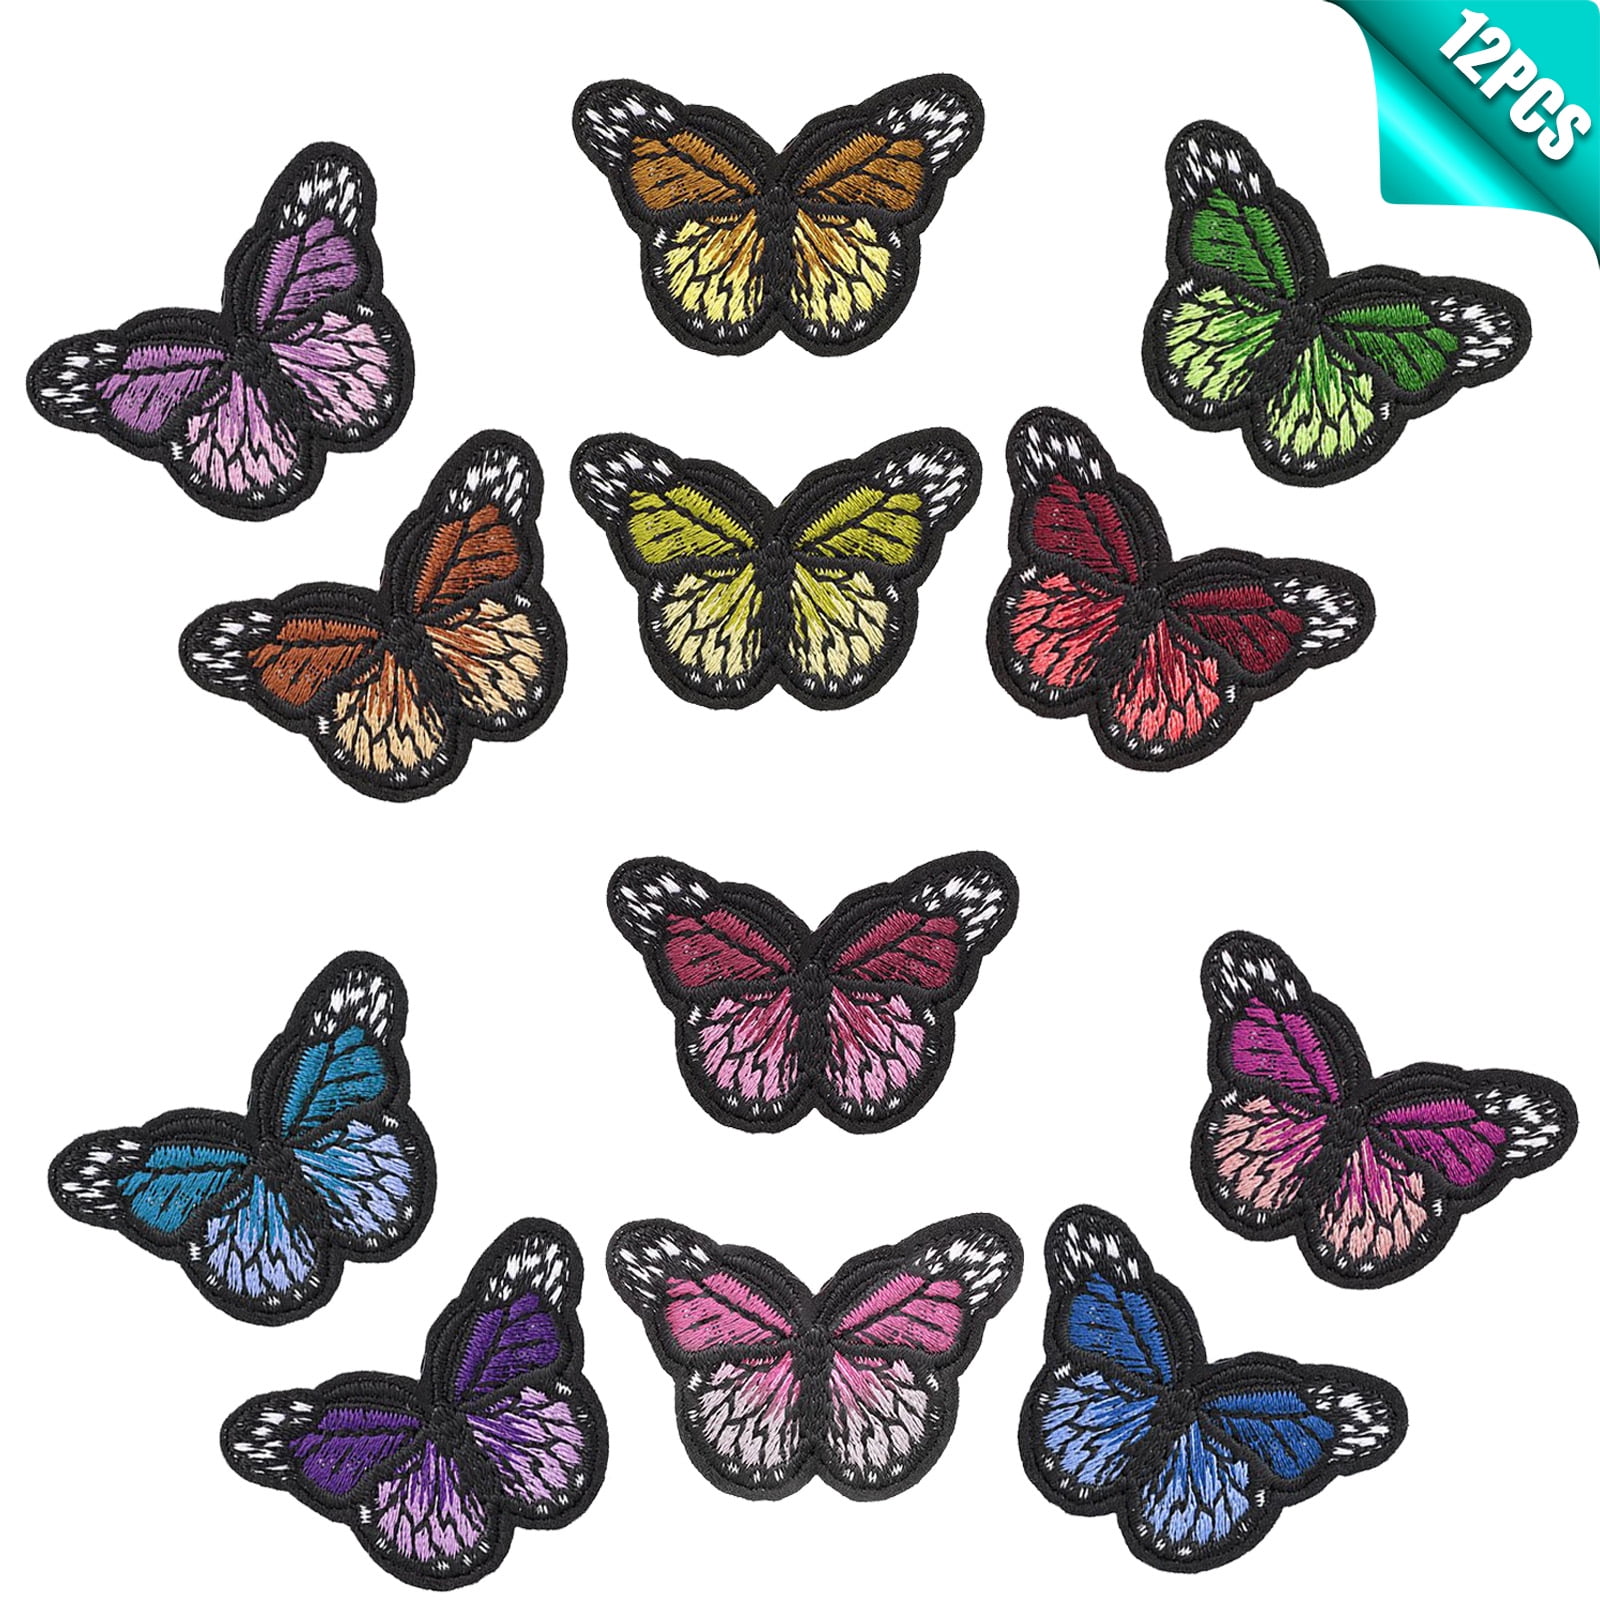 10 Pack Delicate Embroidered Patches, Butterfly Embroidery Patches, Iron on Patches, Sew on Applique Patch, Custom Backpack Patches for Boys, Girls